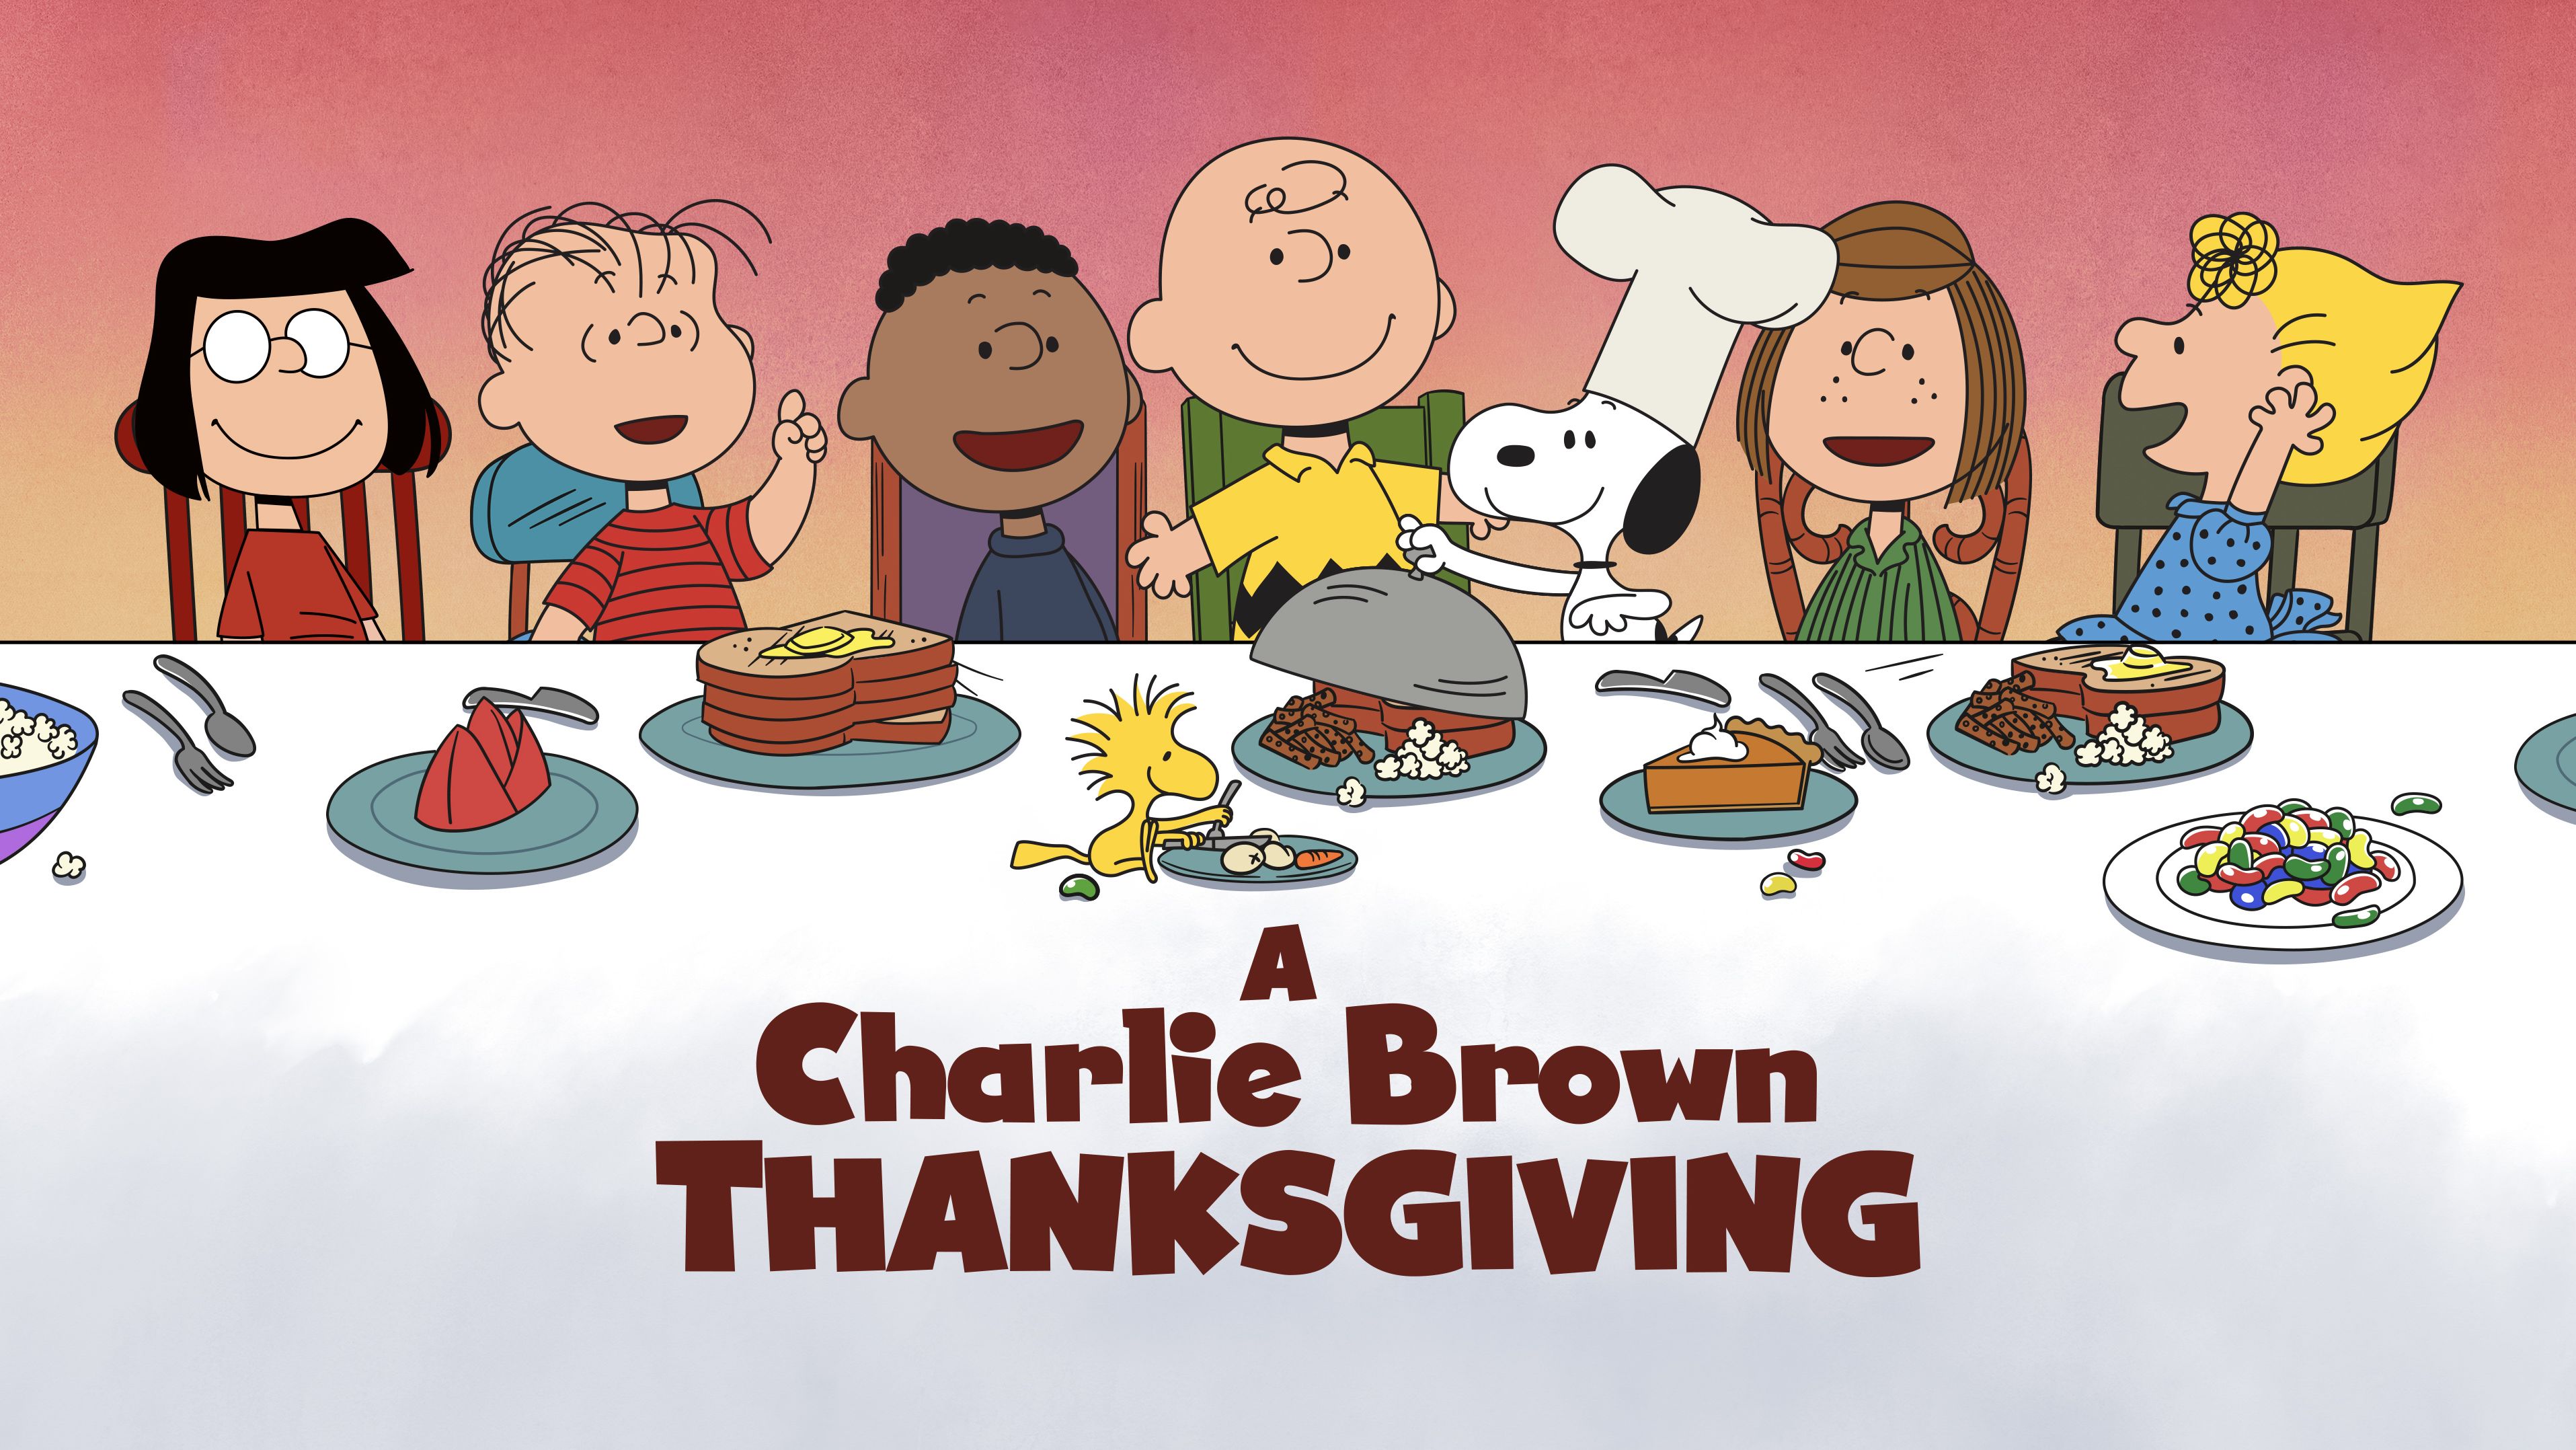 Charlie Brown and the gang will be coming to PBS for the holidays.